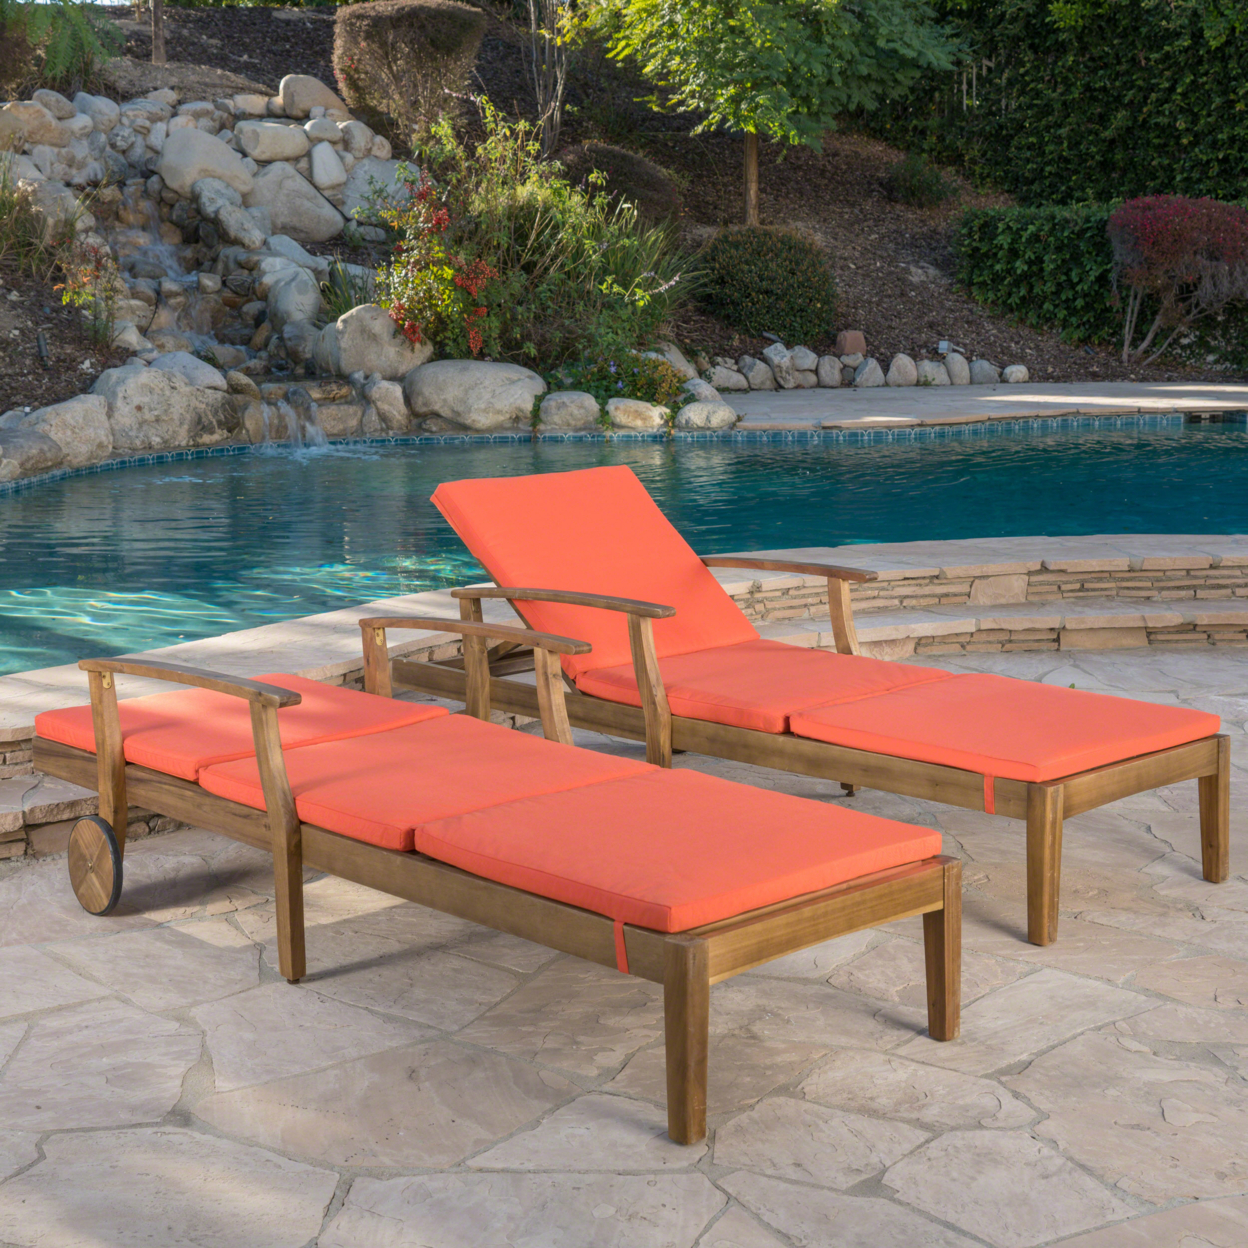 Daisy Outdoor Teak Finish Chaise Lounge With Water Resistant Cushion - Orange, Set Of 2